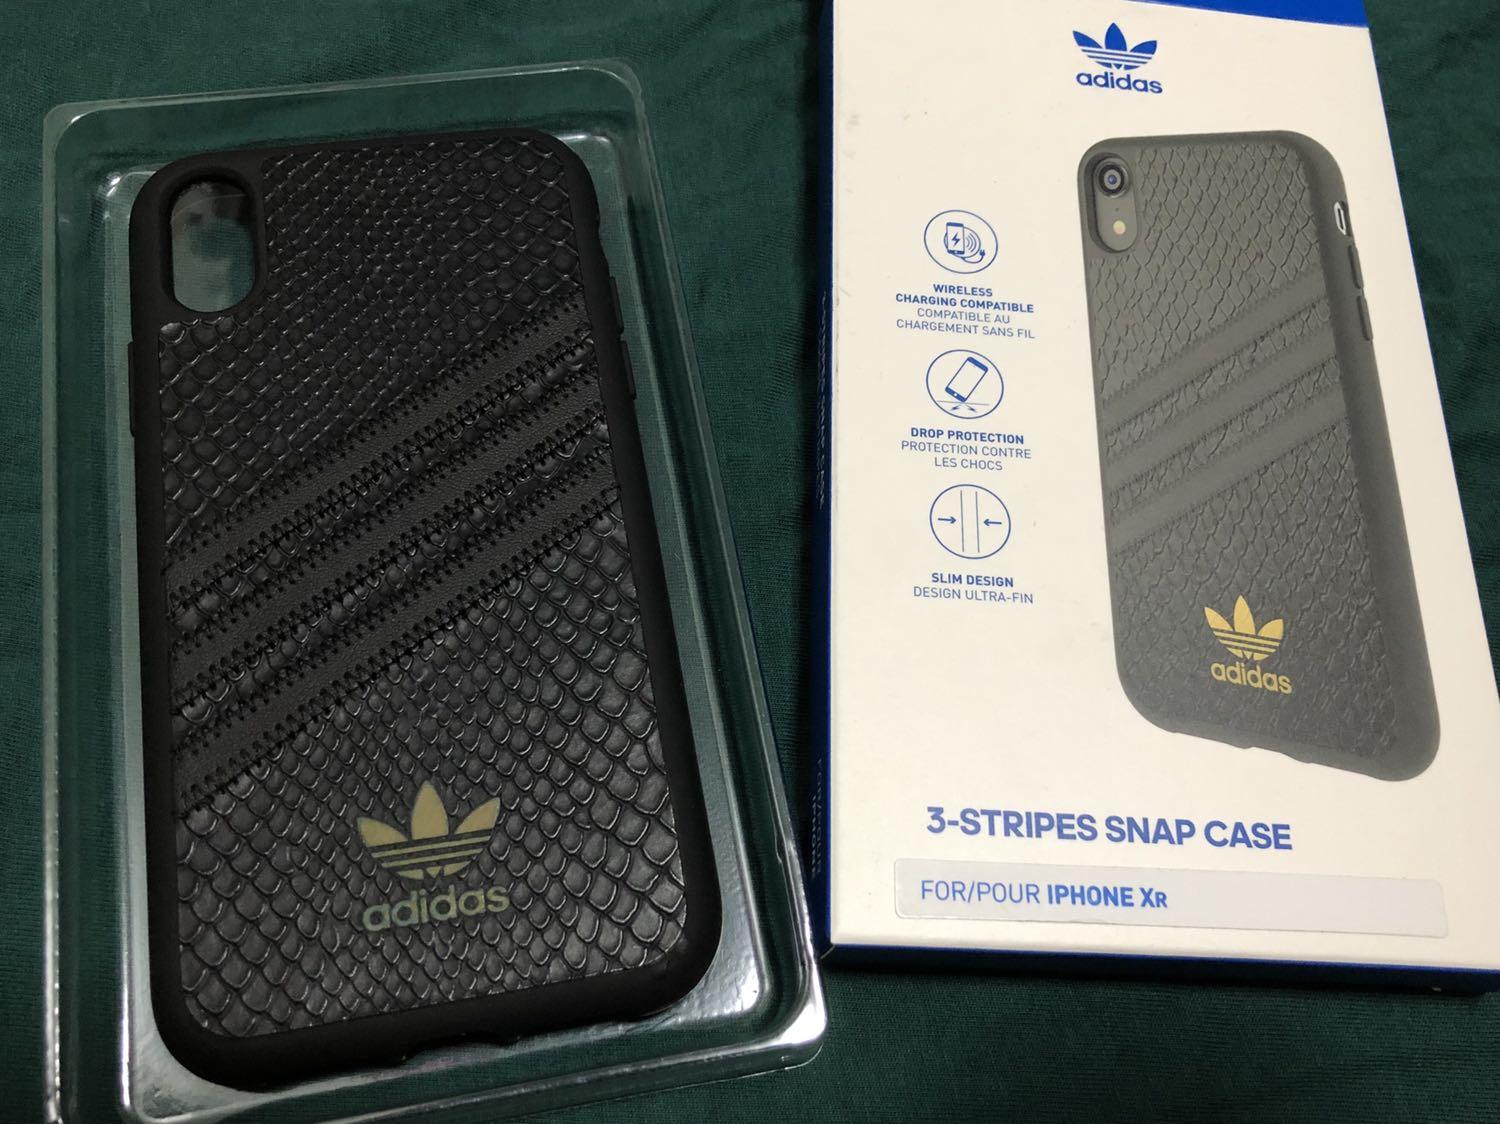 Adidas Iphone Xr Case Mobile Phones Tablets Mobile Tablet Accessories Cases Sleeves On Carousell